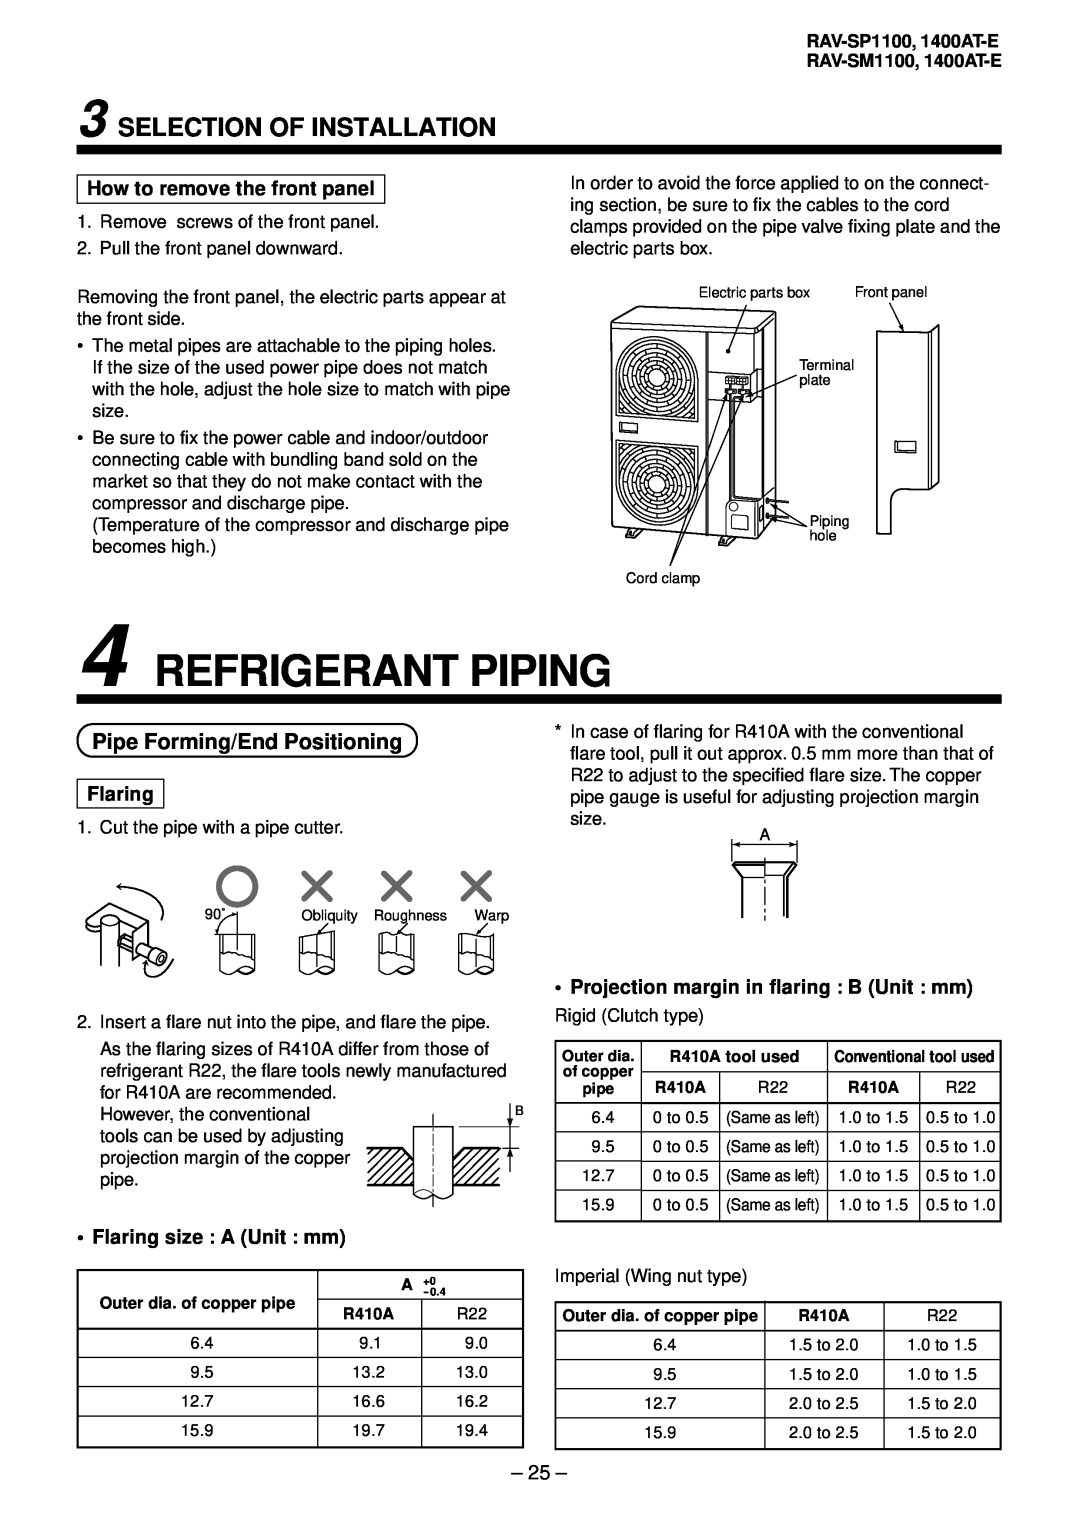 Balcar R410A service manual Refrigerant Piping, Pipe Forming/End Positioning, How to remove the front panel, Flaring, 25 